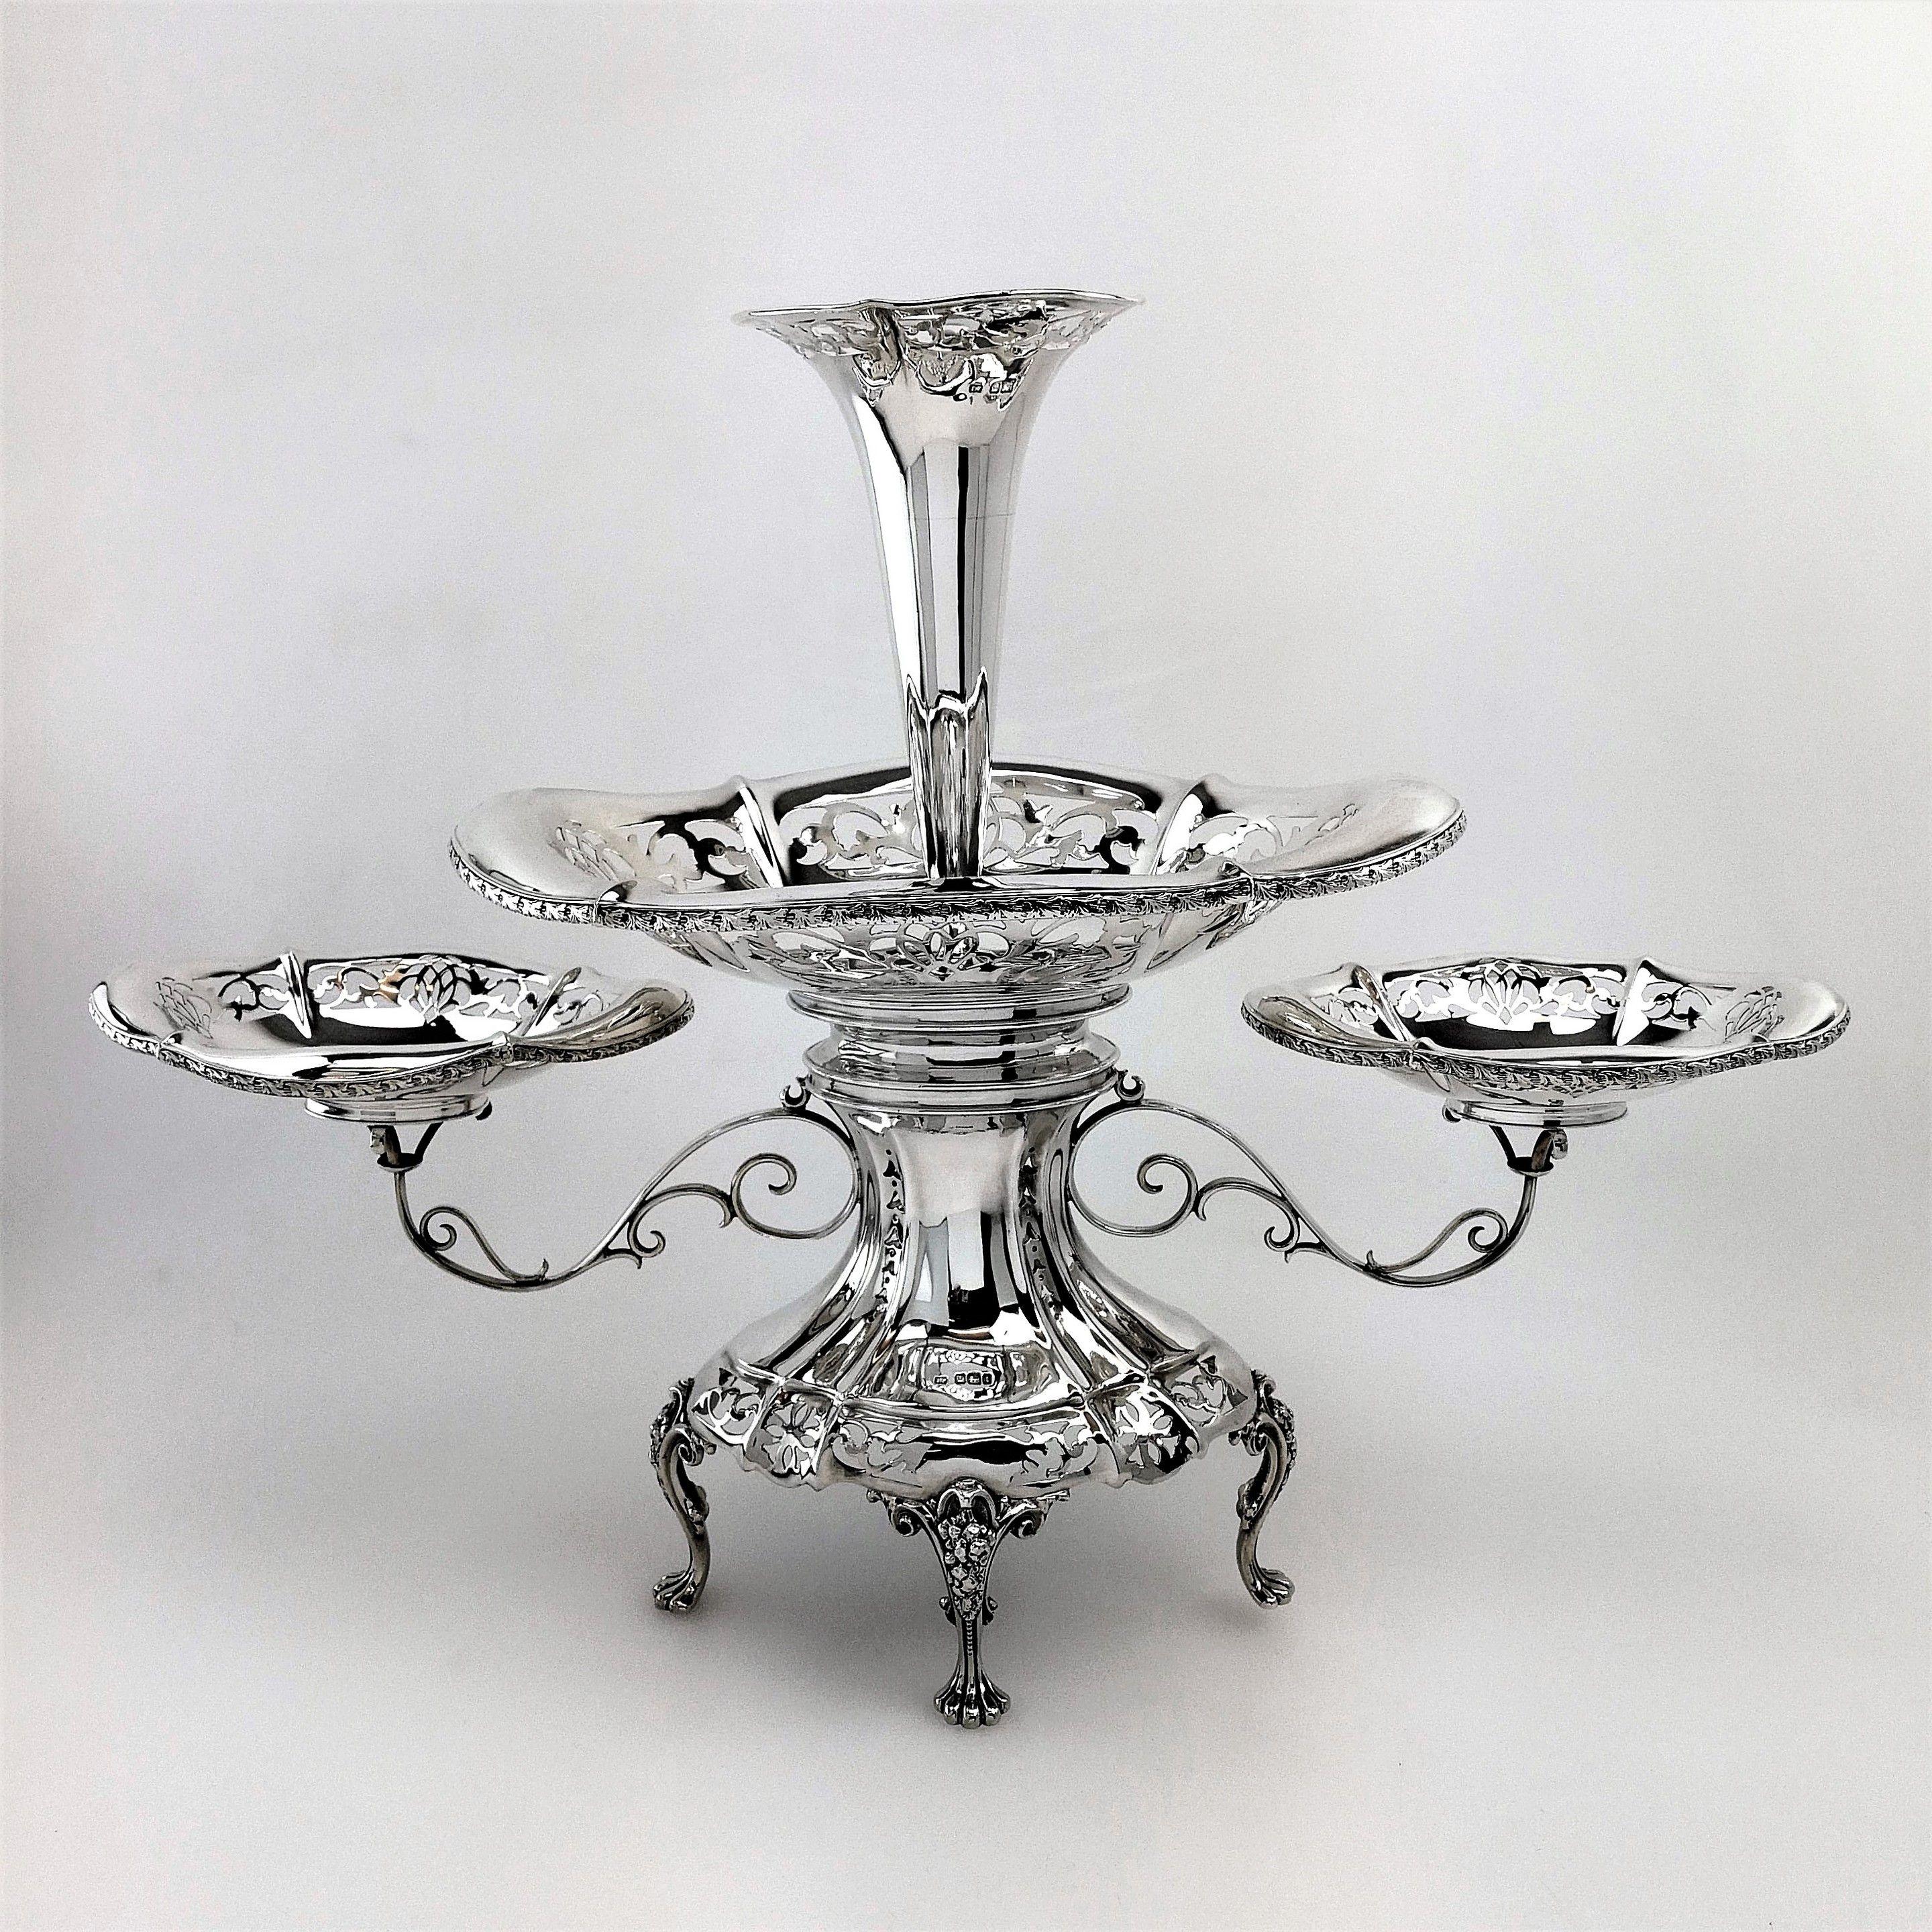 An Antique solid Silver Epergne Centrepiece with a large oval central basket supporting a tall trumpet shaped vase on top of an impressive concave shaped stand. The central stand has two scrolled branches supporting a matched pair of smaller oval